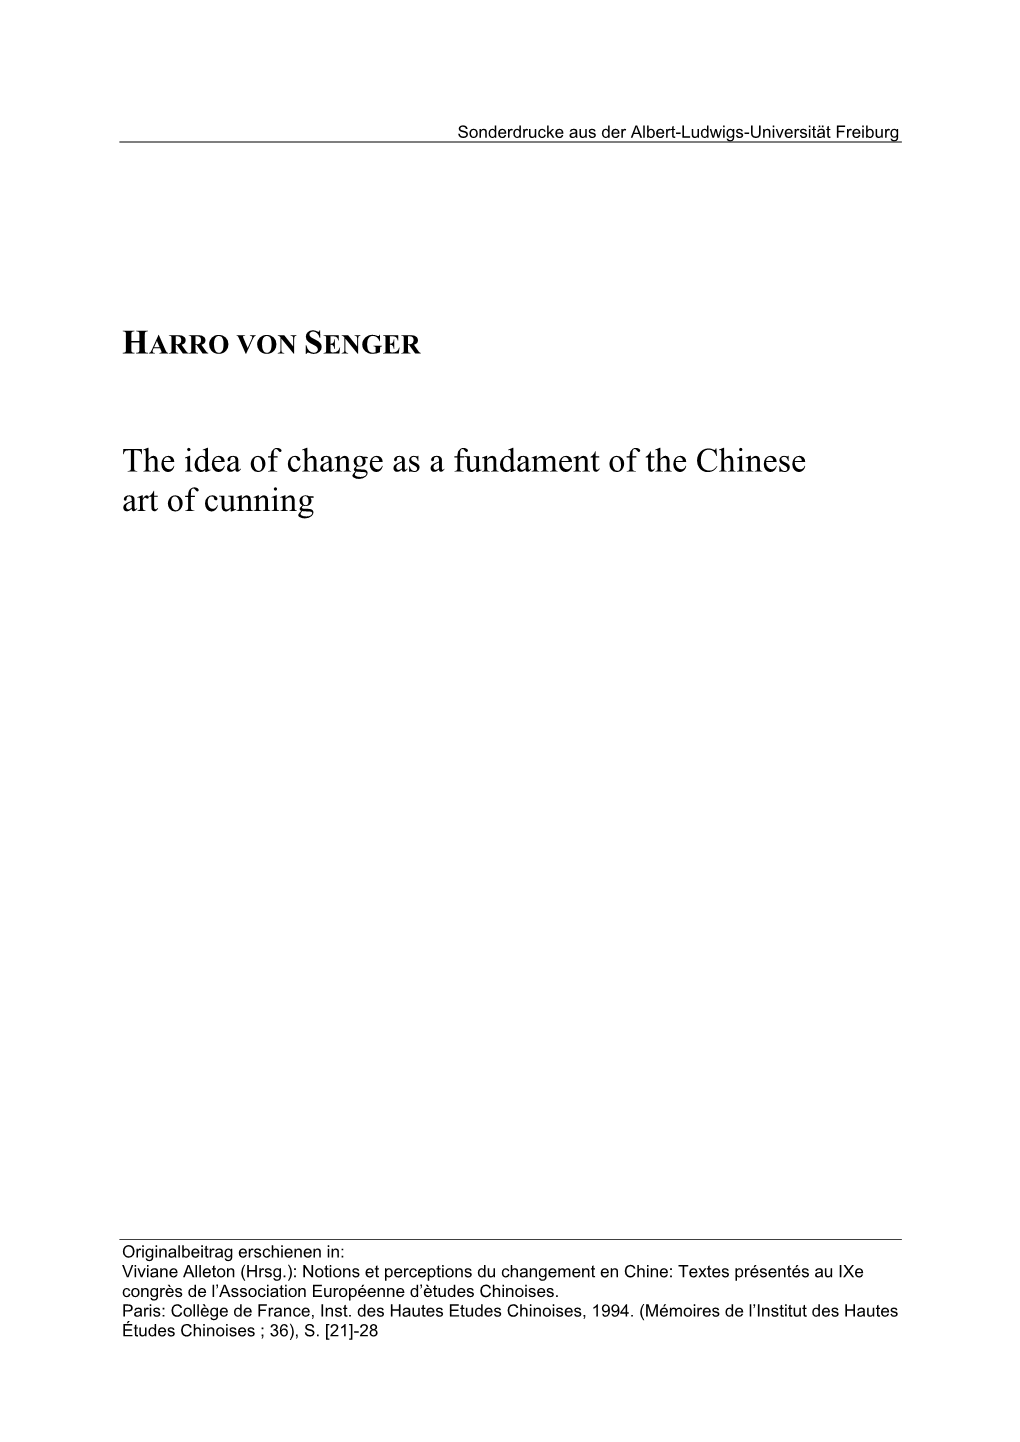 The Idea of Change As a Fundament of the Chinese Art of Cunning